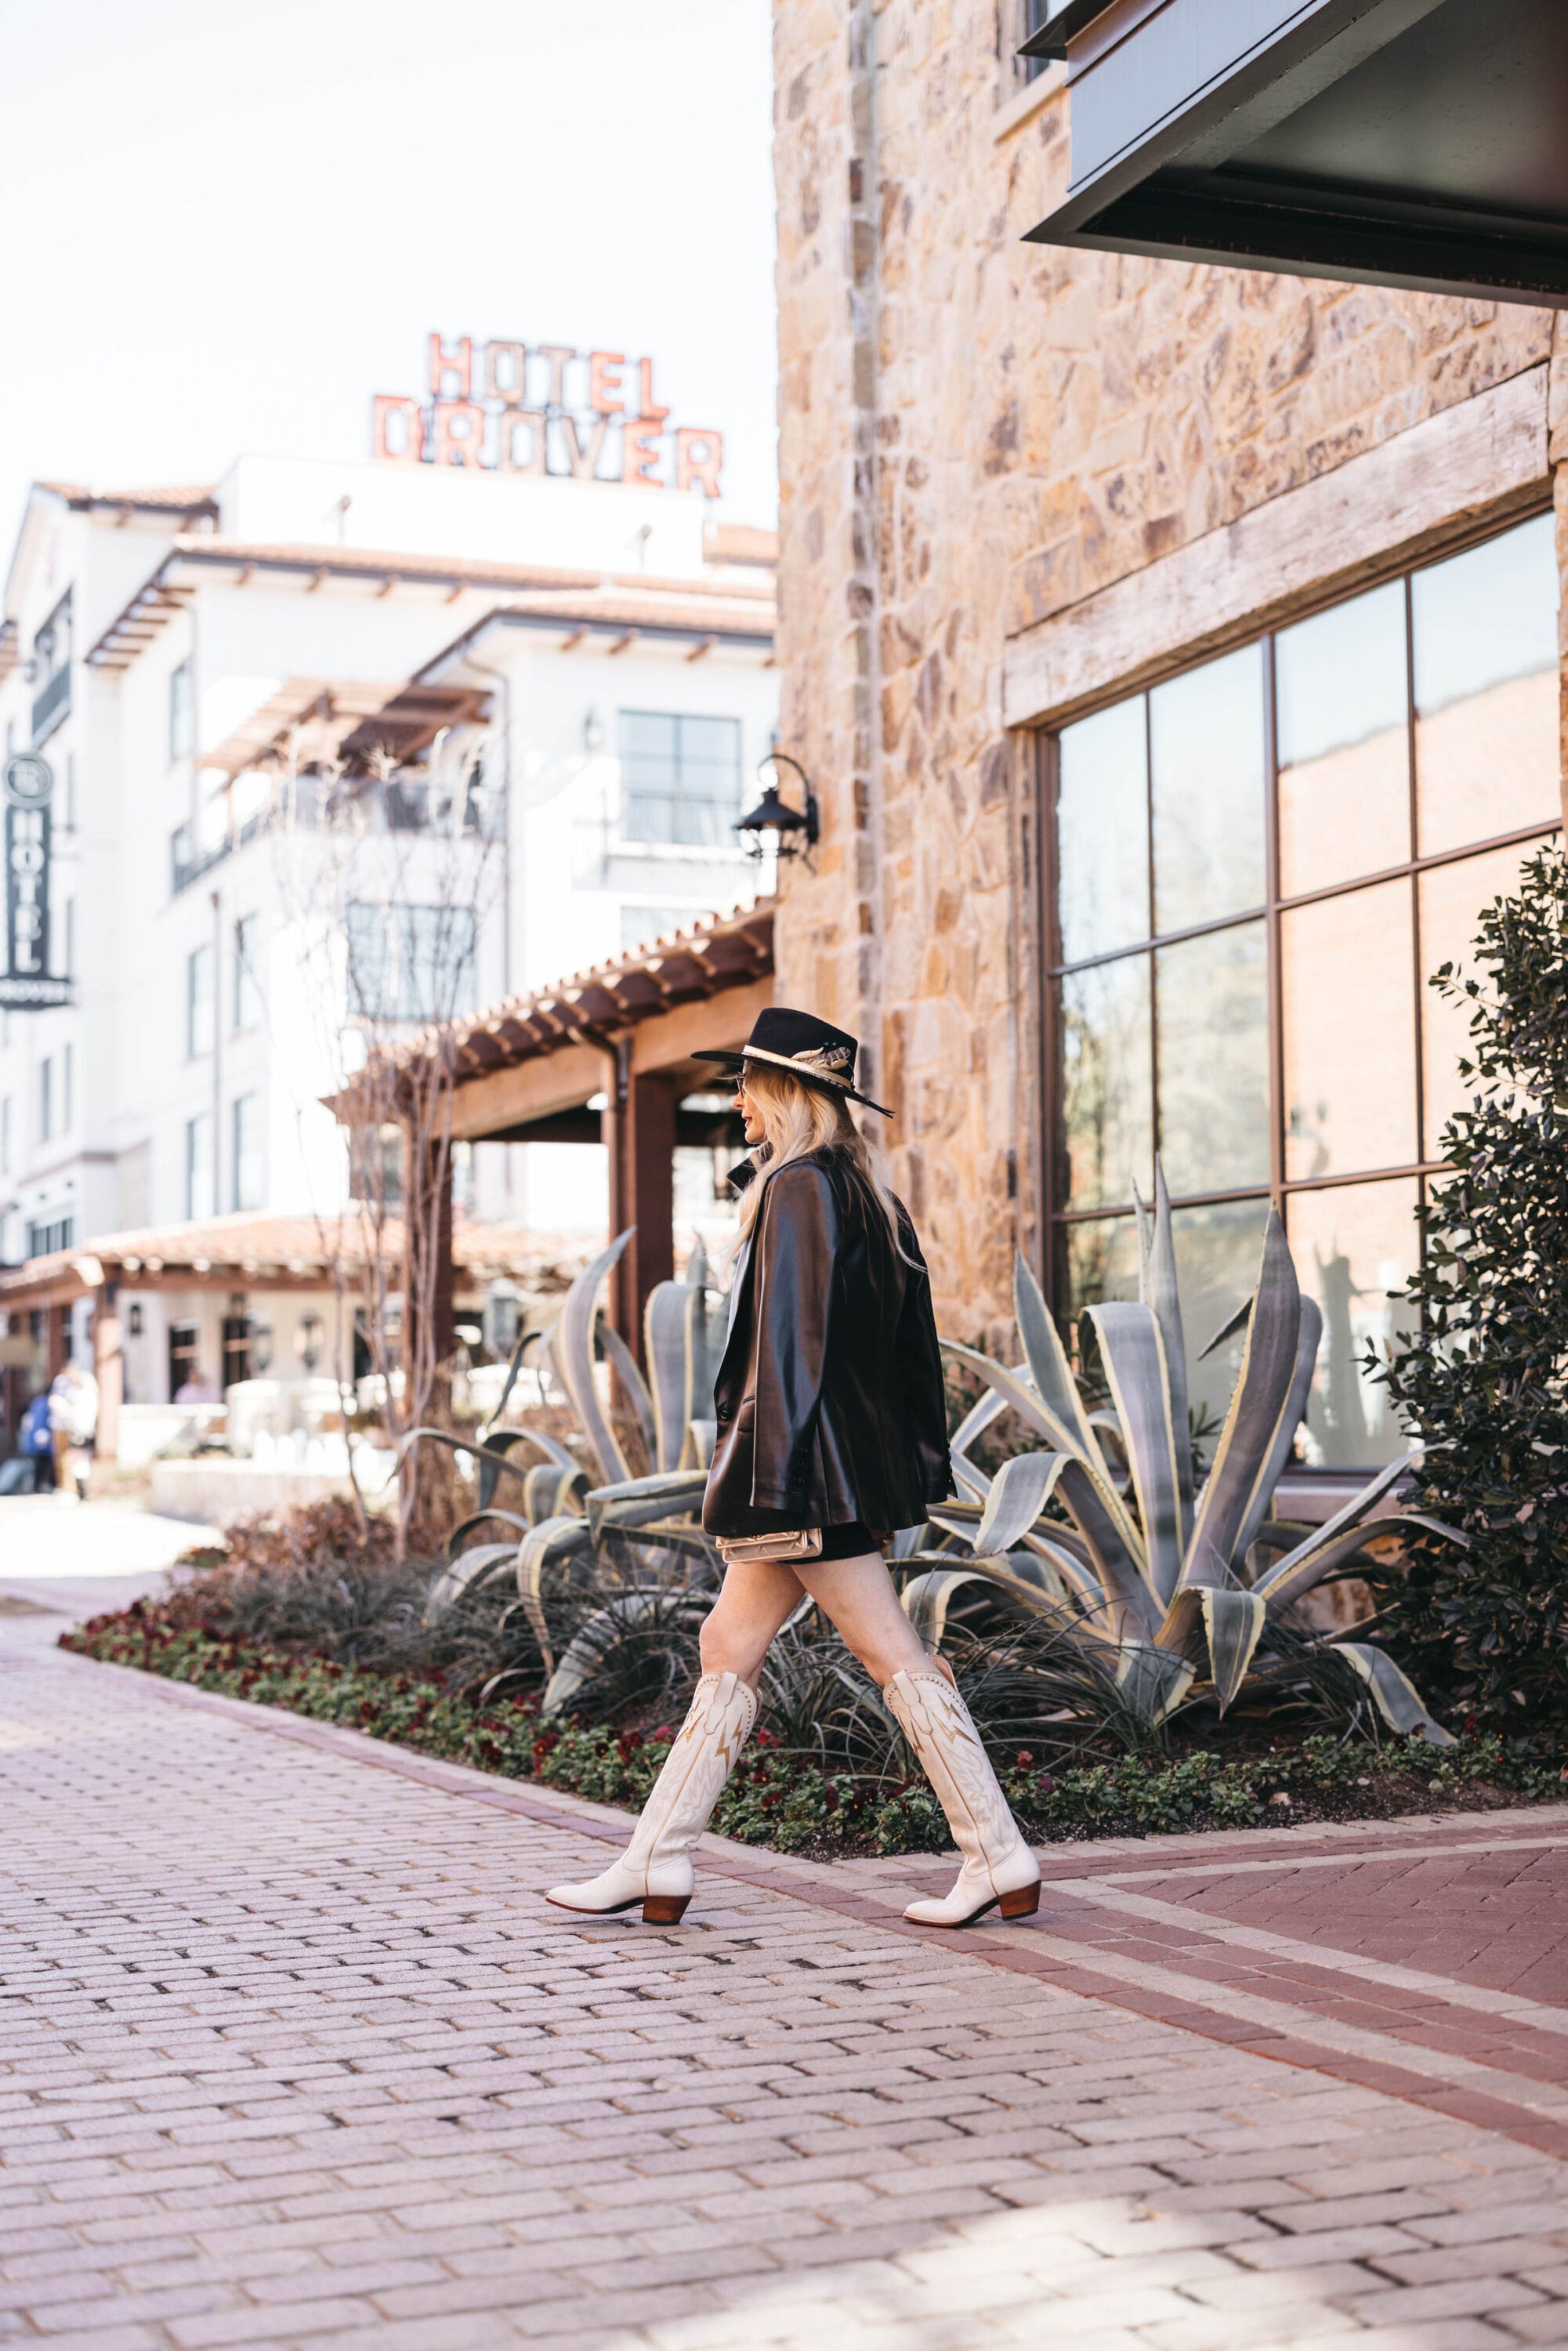 Over 40 fashion blogger wearing her western best including a black denim dress with a vegan leather blazer and City boots cowboy boots in front of Hotel Drover.